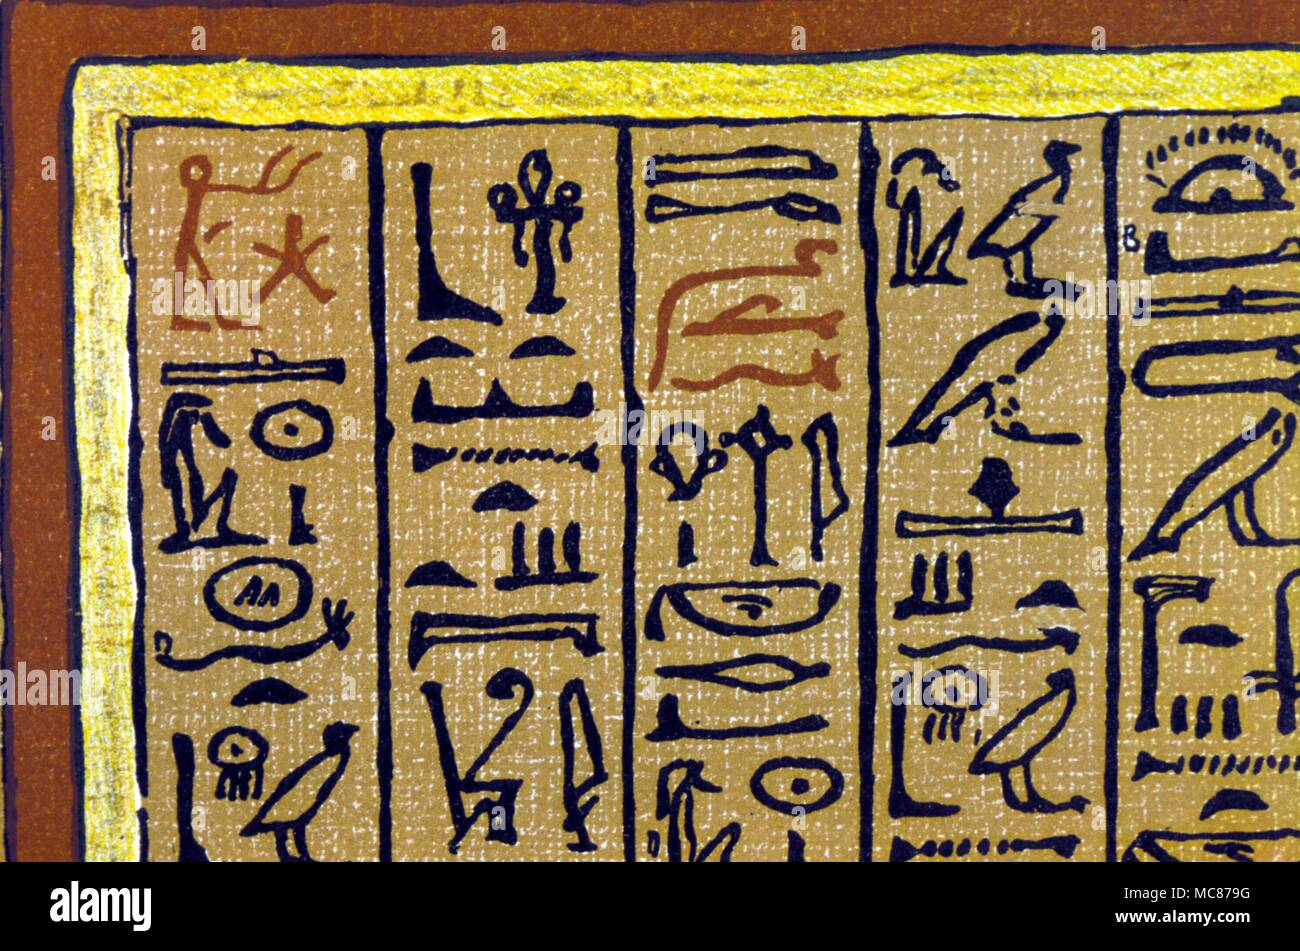 EGYPTIAN MYTH - HIEROGLYPHS Opening to the Hunefer papyrus of the 'Egyptian Book of the Dead' (Budge lithographic edition). The first hieroglyphics depict the 'praying men' and the sba star, in the invocation to the gods. Stock Photo